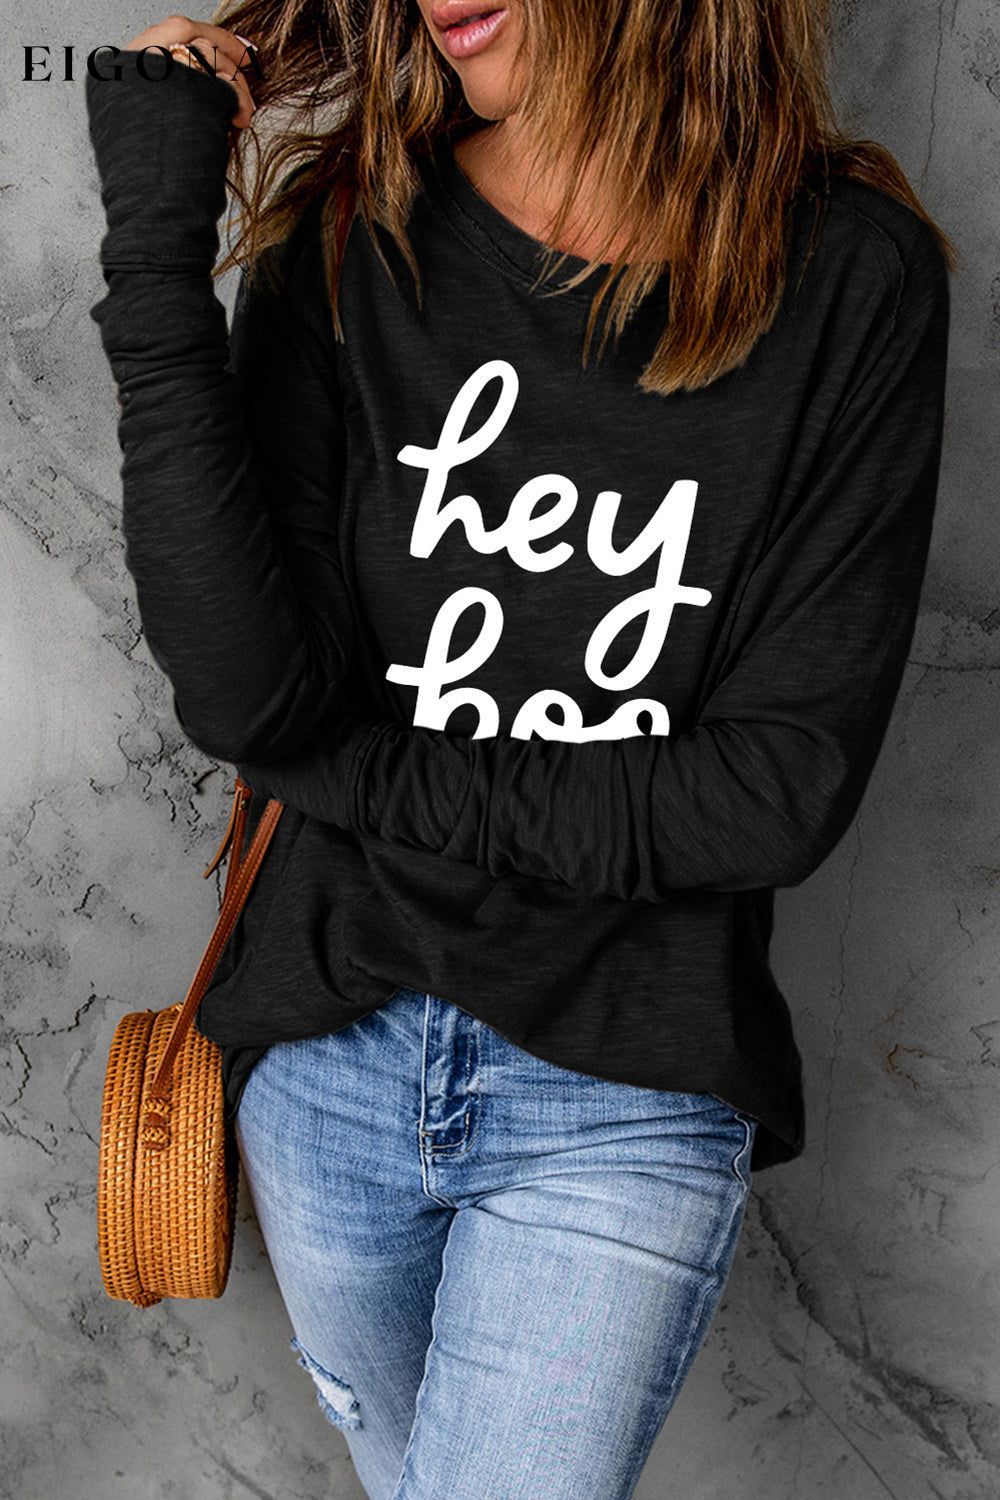 HEY BOO Graphic Round Neck T-Shirt clothes long sleeve Ship From Overseas shirt shirts SYNZ top trend